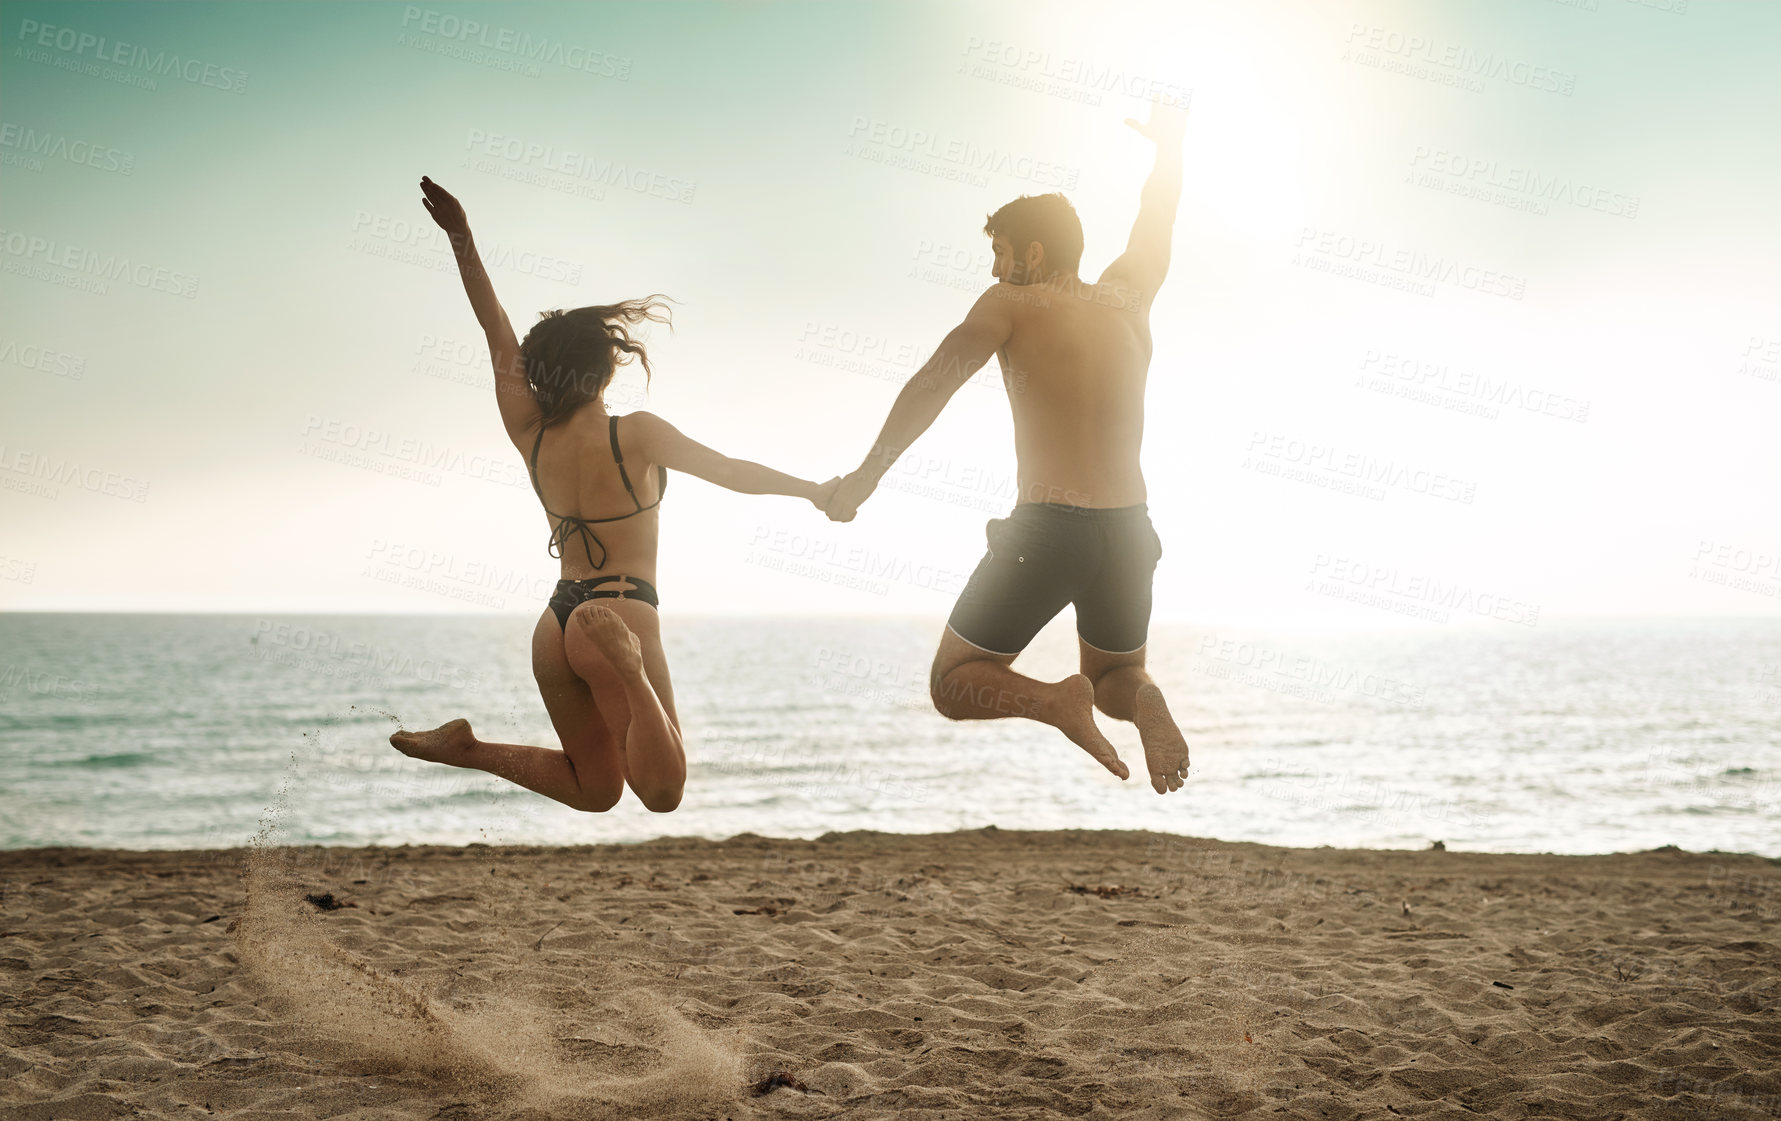 Buy stock photo Rearview shot of a young couple jumping into mid-air at the beach